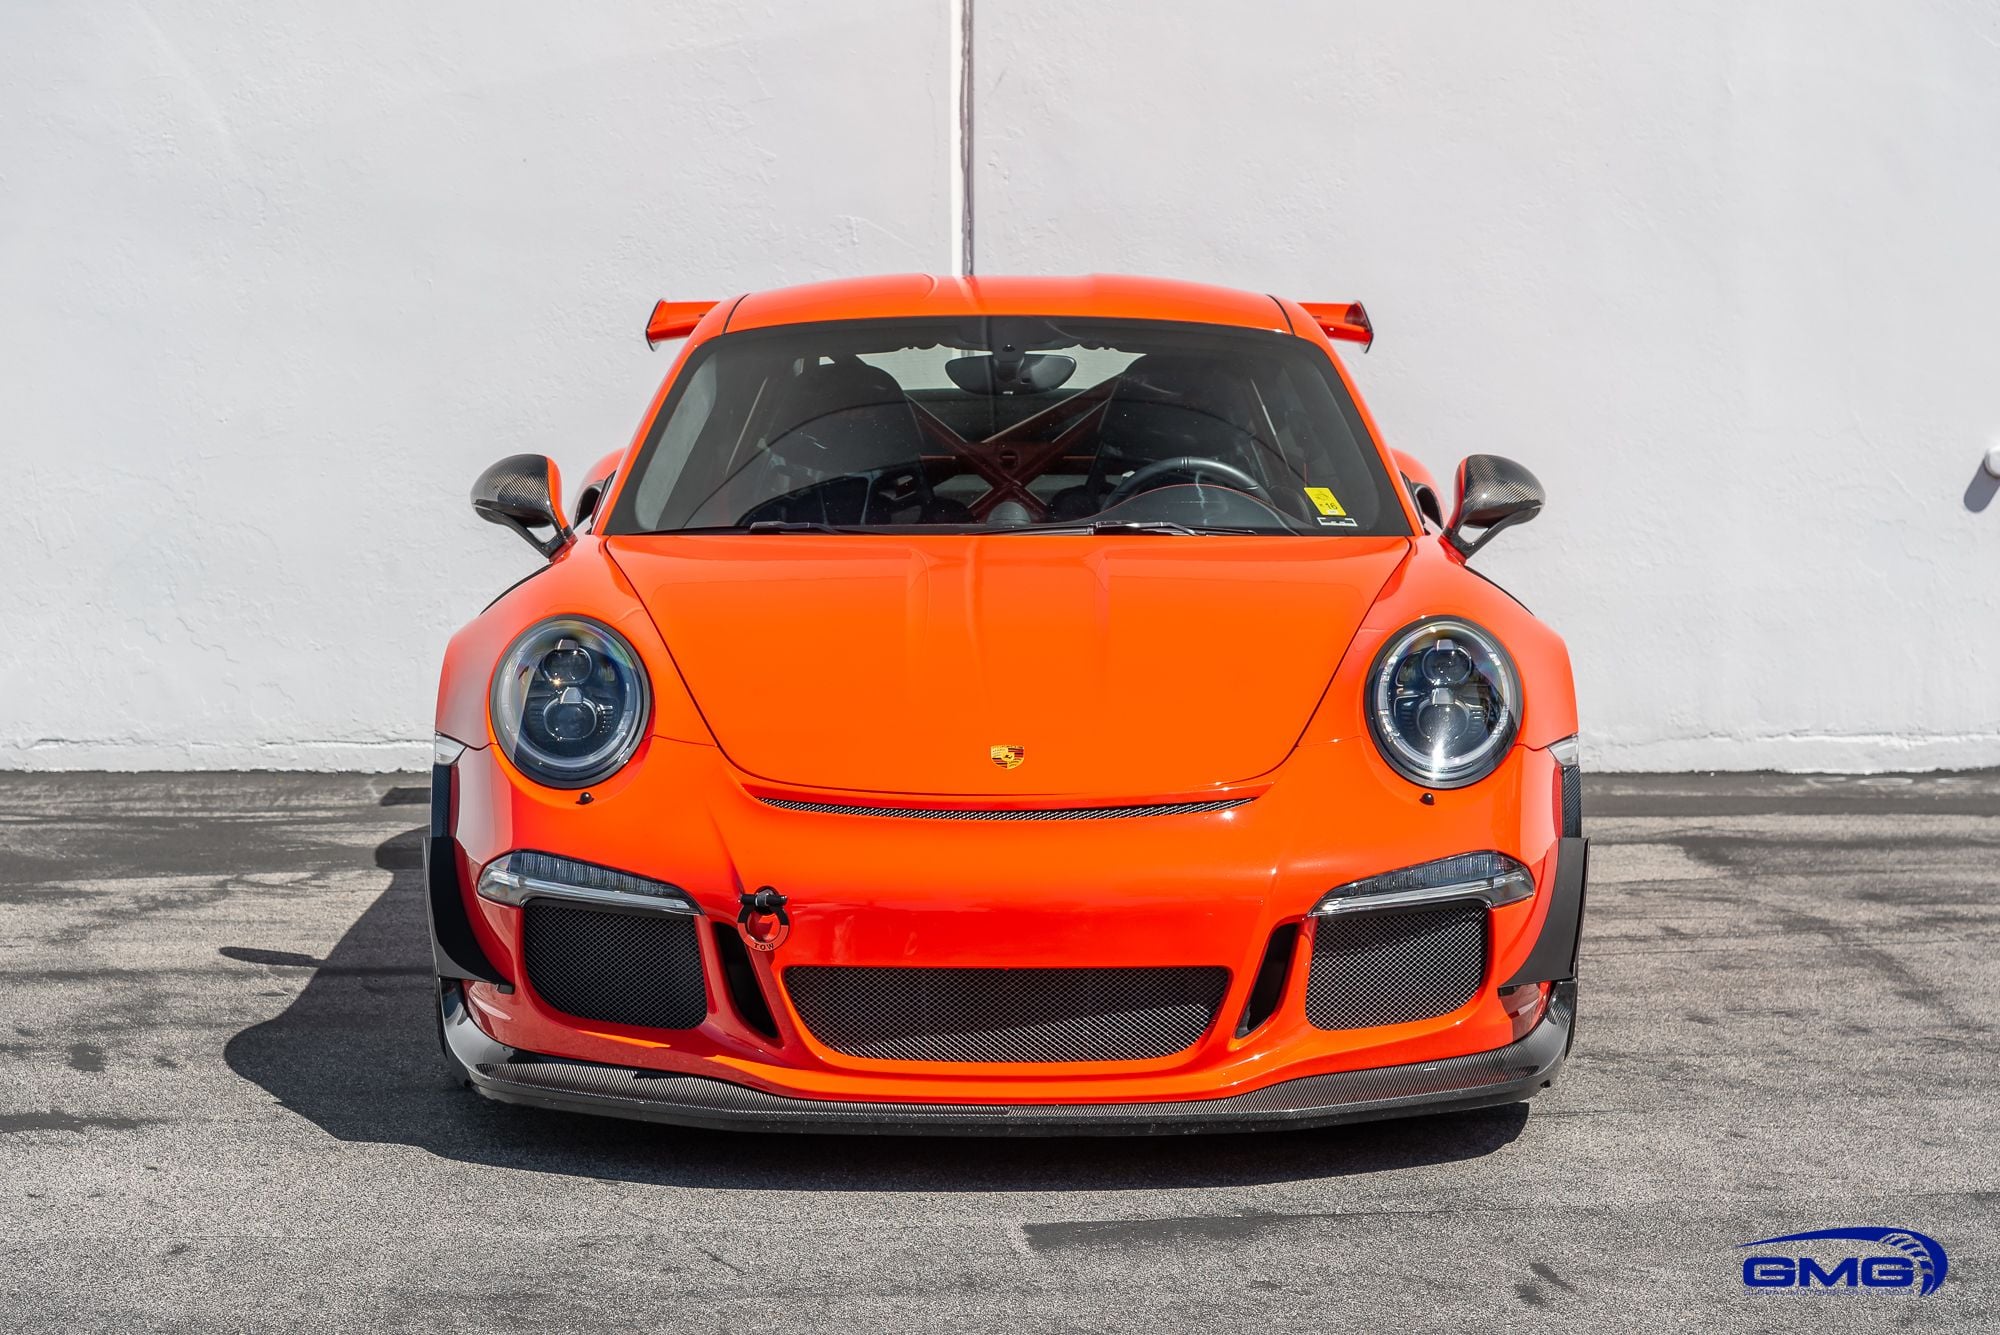 GMG Racing - Stunning Track Prepped Lava Orange 991.1 GT3 RS For Sale